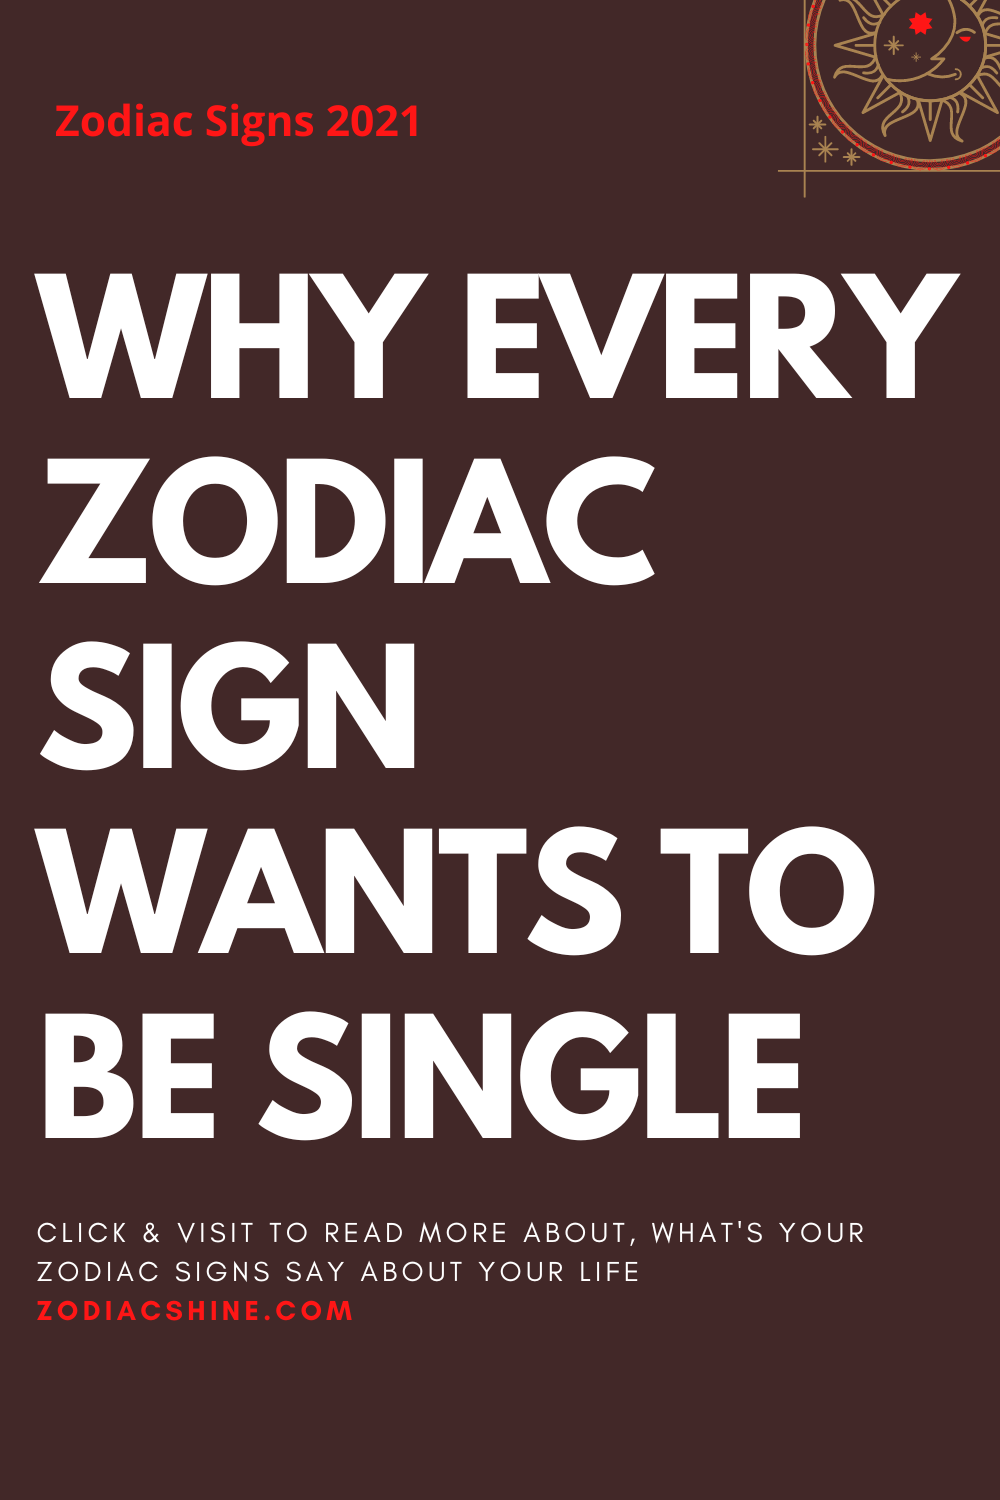 WHY EVERY ZODIAC SIGN WANTS TO BE SINGLE